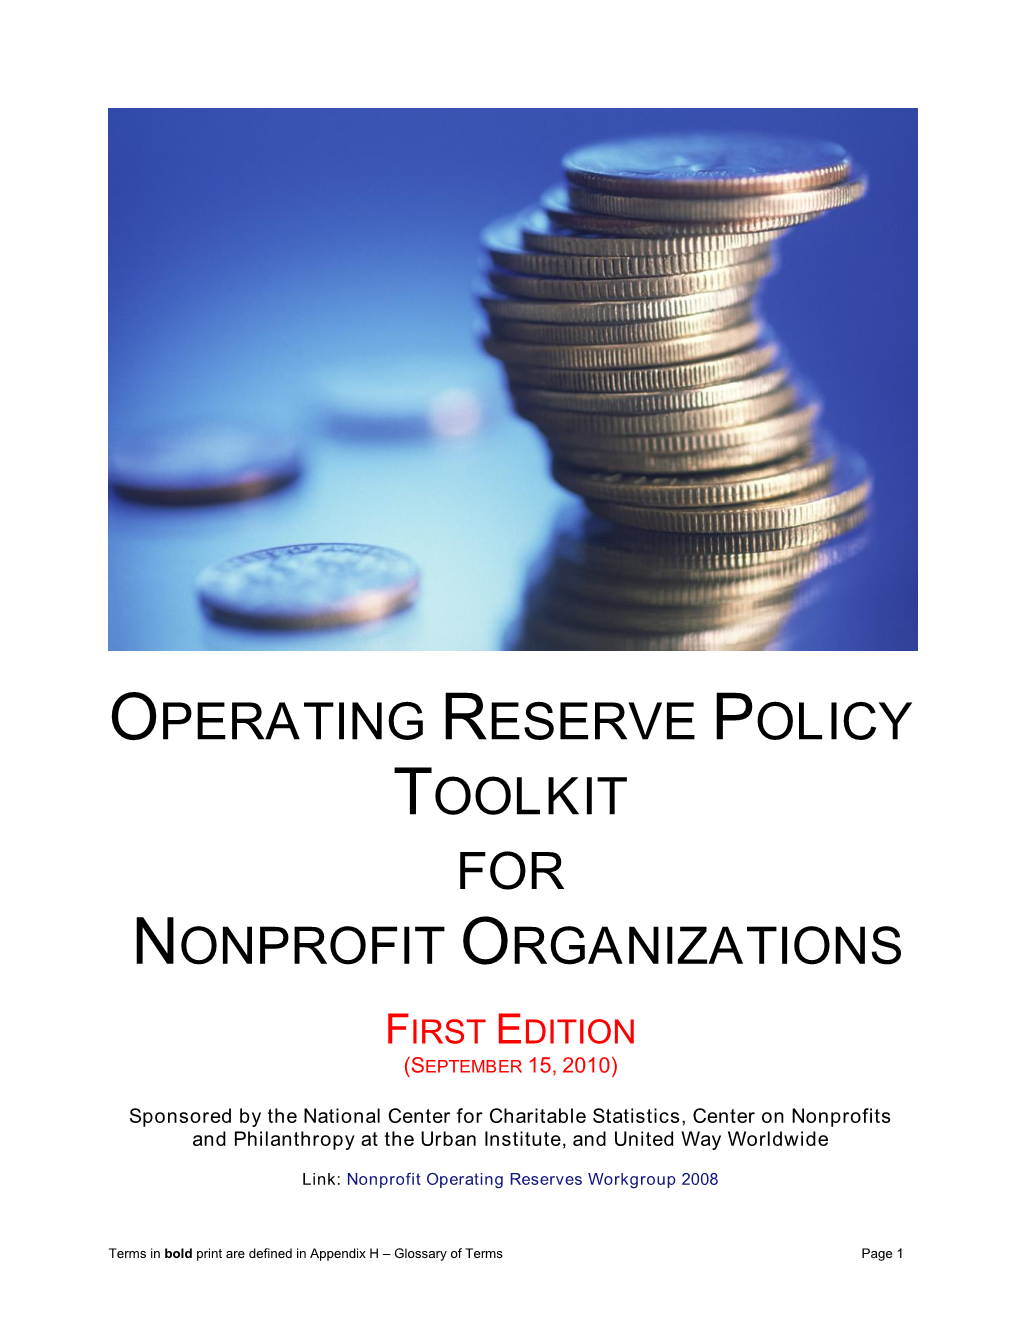 Operating Reserve Policy Toolkit for Nonprofit Organizations